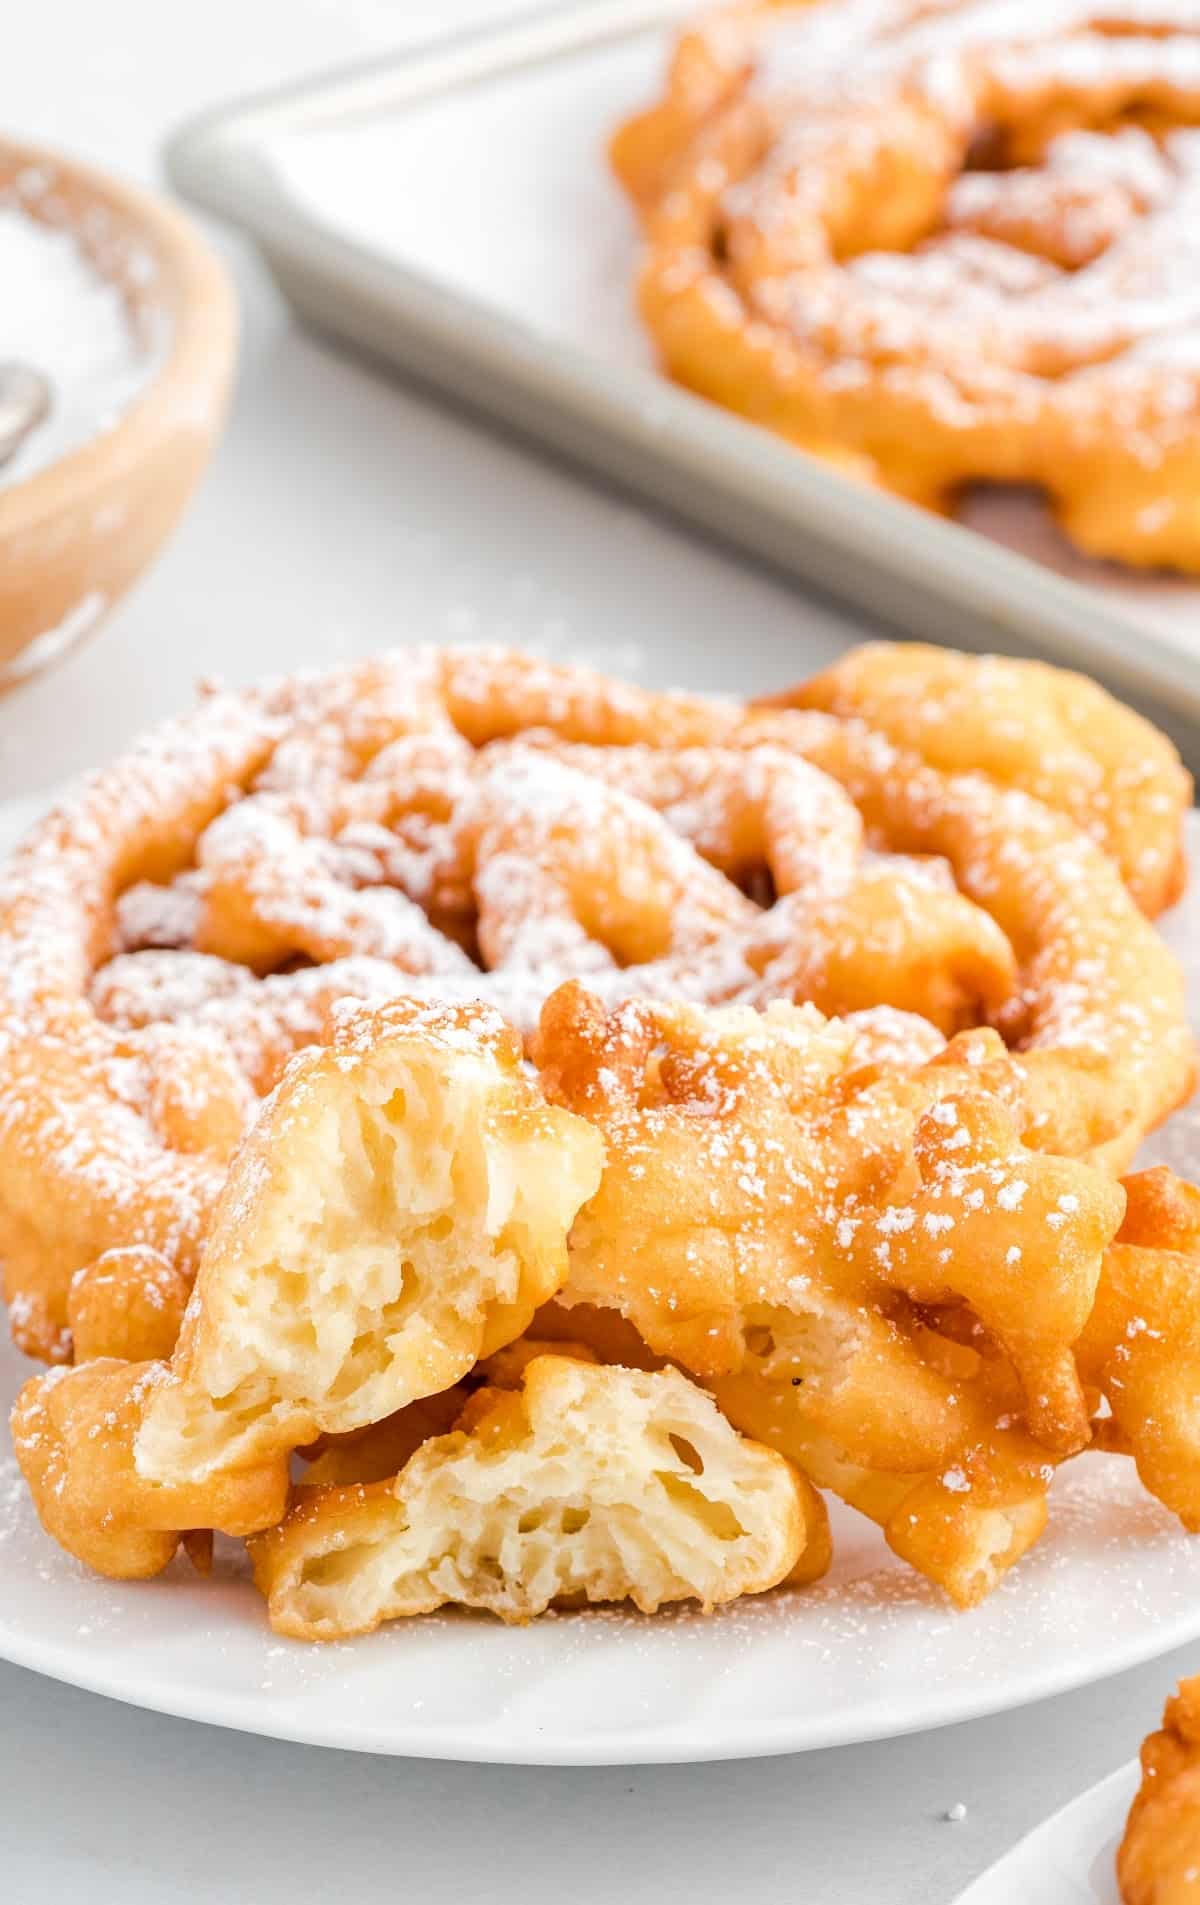 A plate of food, with Funnel cake